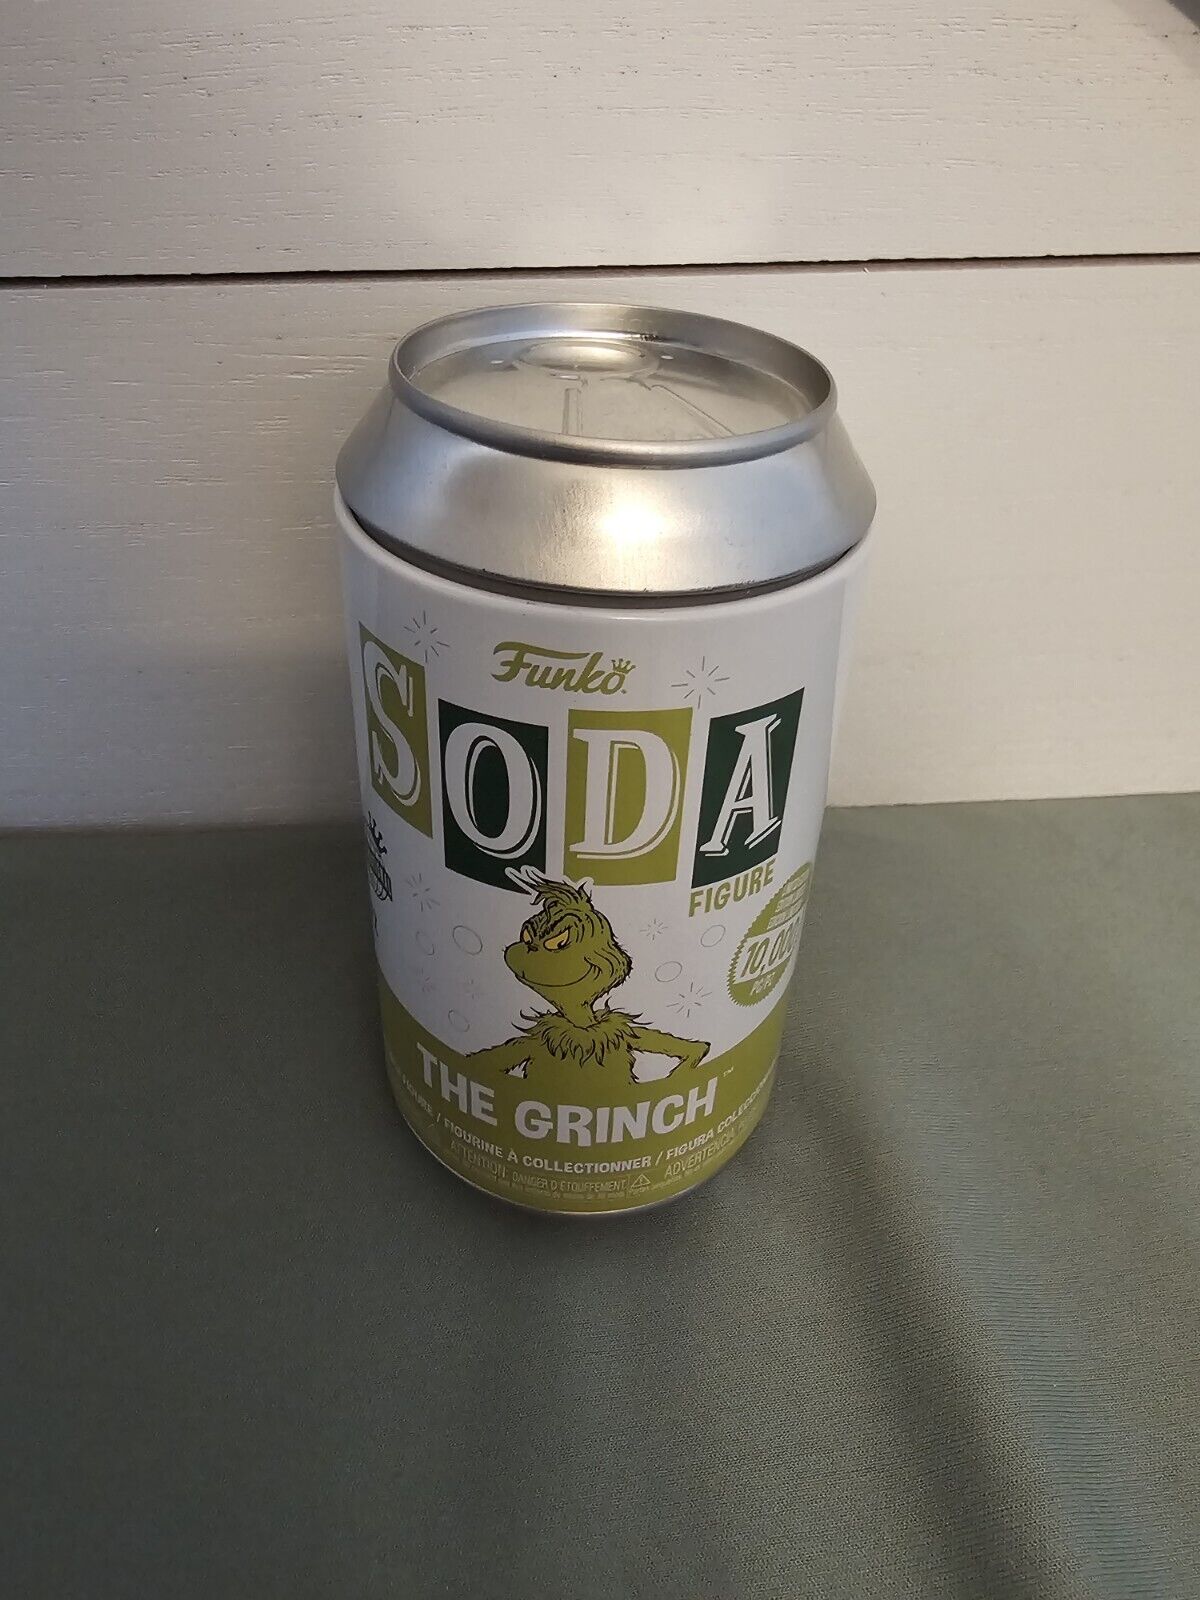 NEW Funko Soda The Grinch SEALED CAN Christmas Animated Figure ~ 